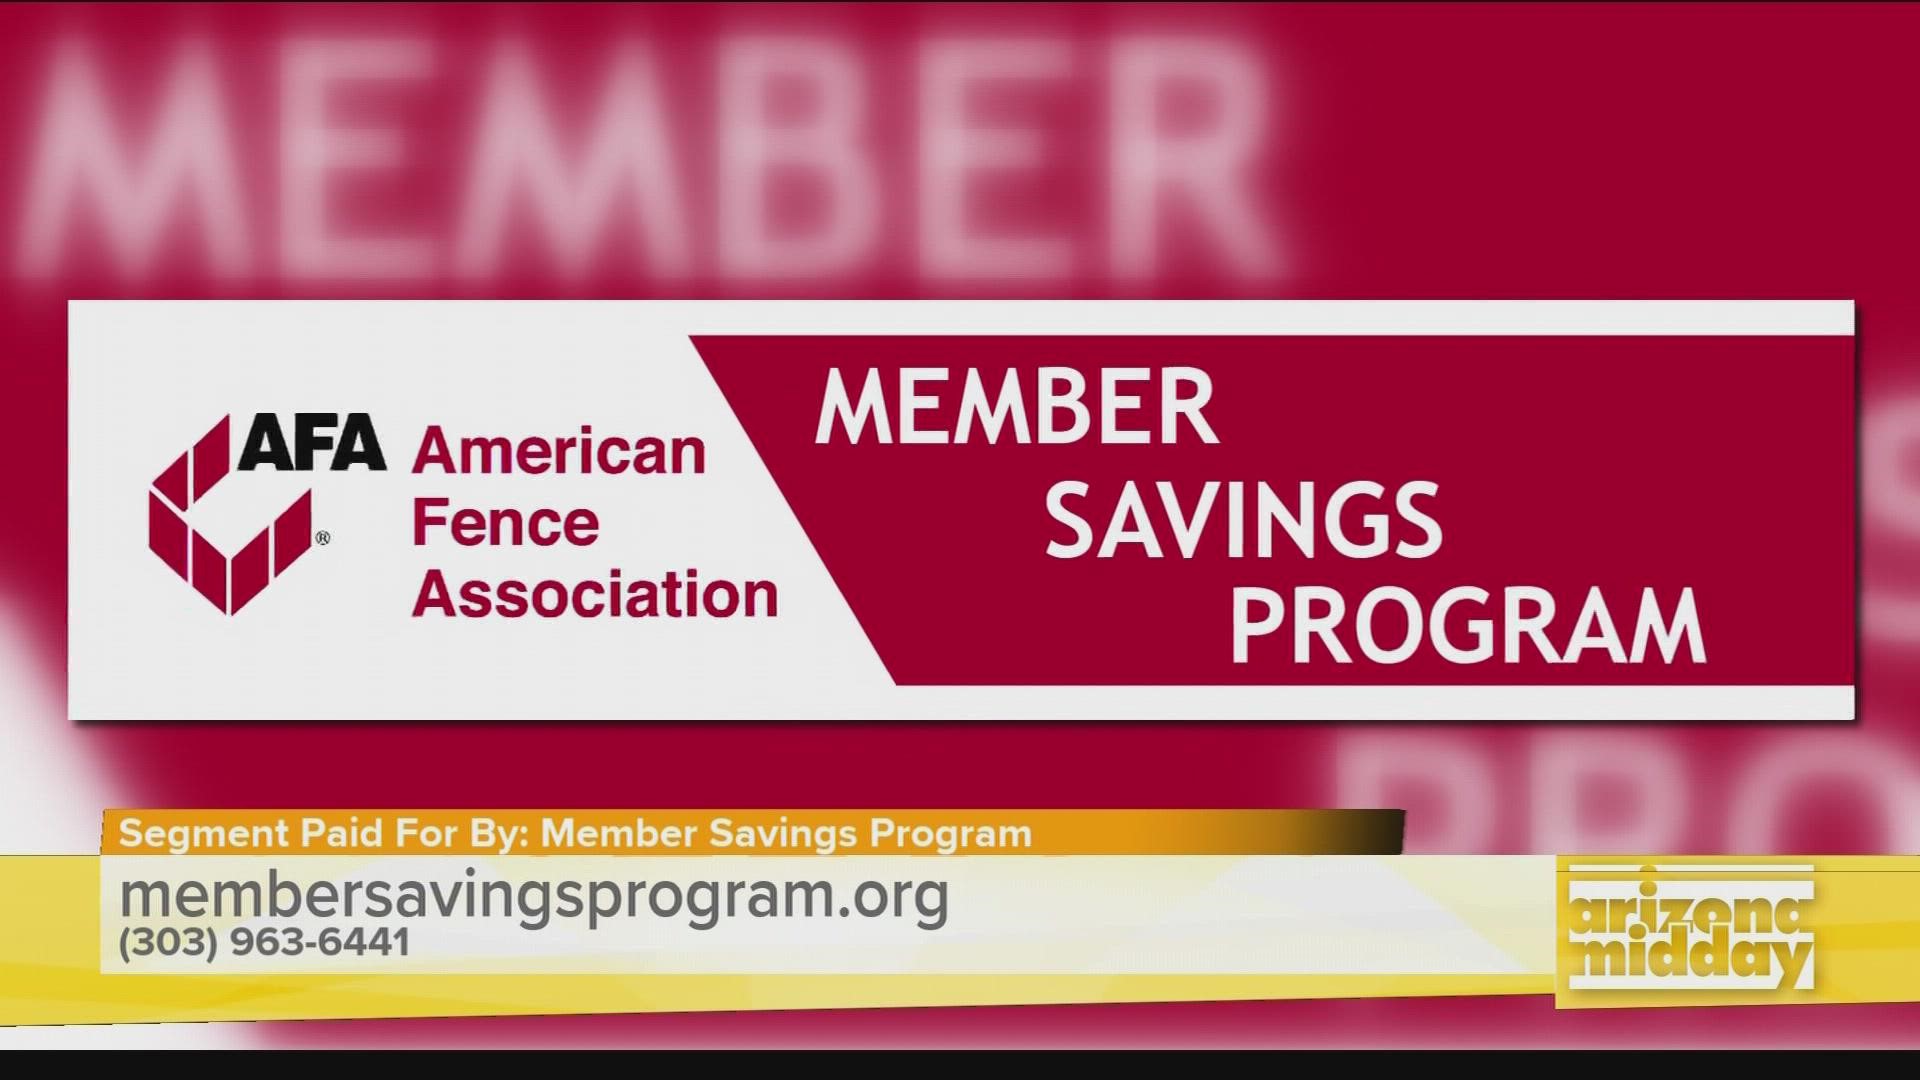 Tony Thornton shares how groups like the American Fence Association are offering value in their memberships by teaming up with Member Savings Program.